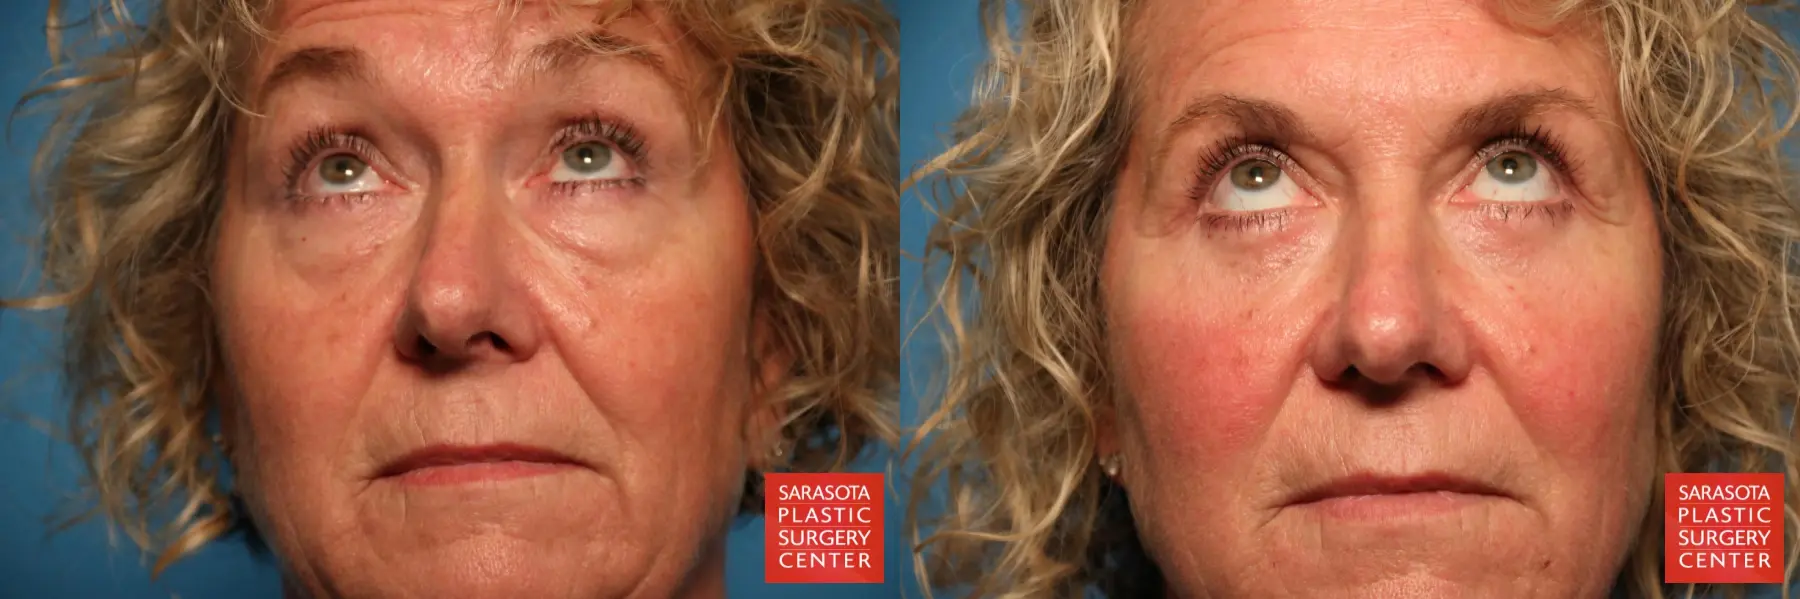 Eyelid Surgery: Patient 4 - Before and After 2